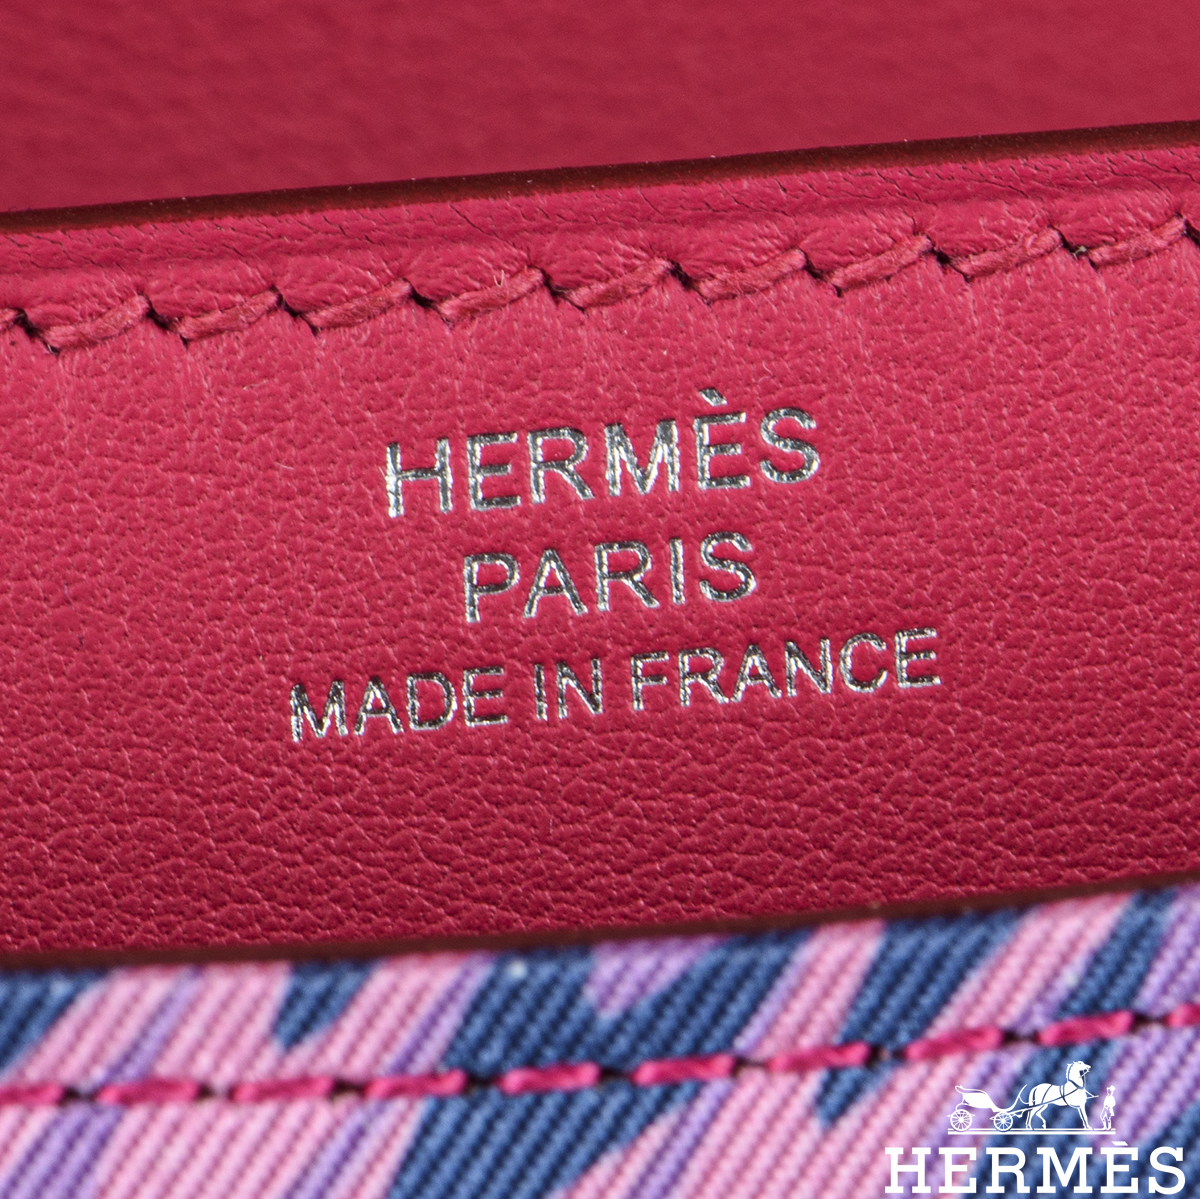 Hermès Limited Edition Constance 18cm Marble Silk PHW